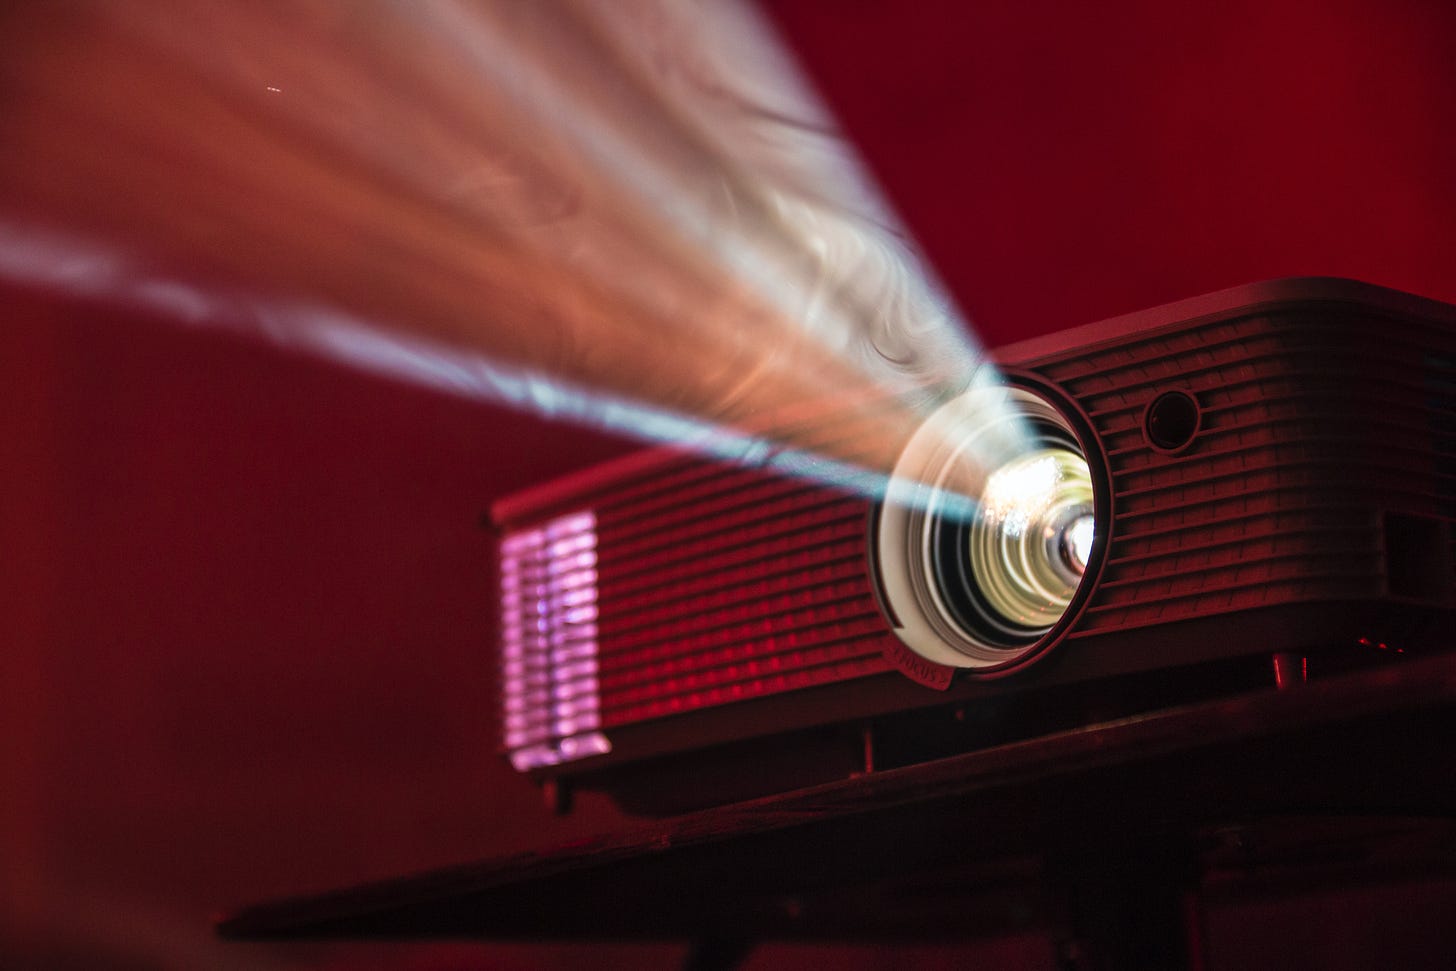 A moody image of an old slide projector, with red and purple hues. The projector is on and the light is streaming out from the machine.